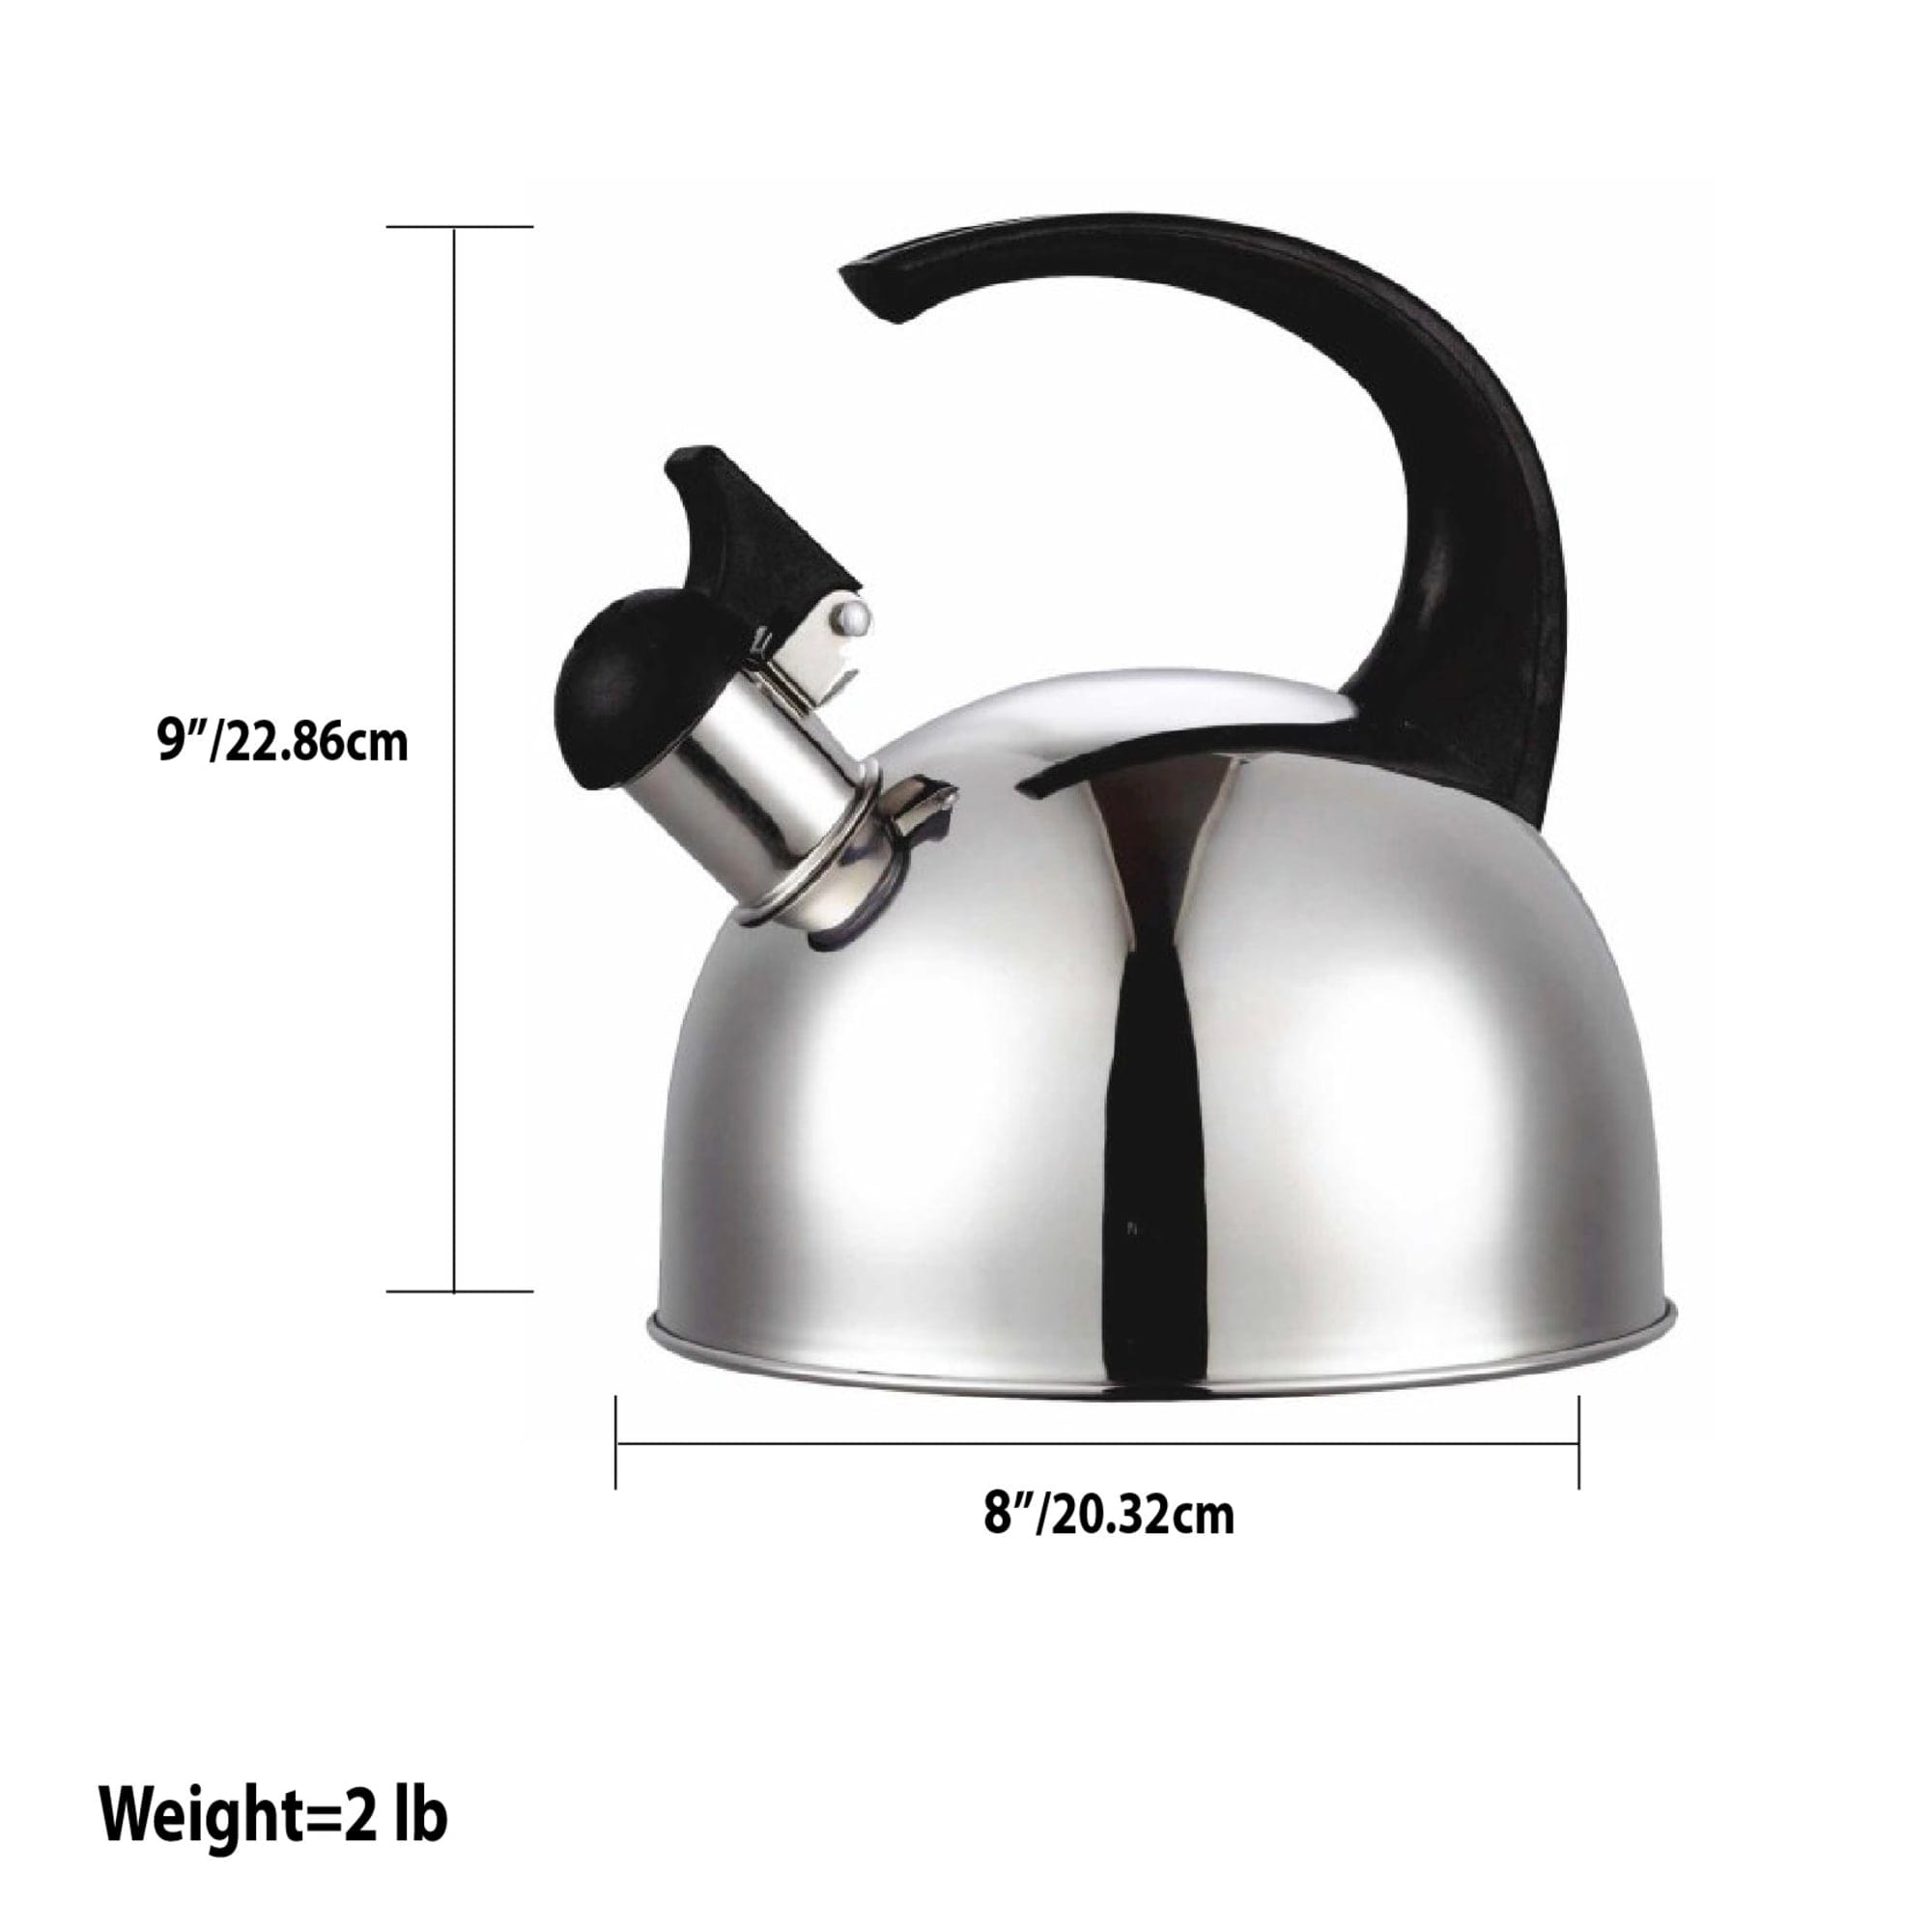 Home Basics 2.0  Liter Brushed Stainless Steel Whistling Tea Kettle with Arc Handle, Silver $8.00 EACH, CASE PACK OF 12